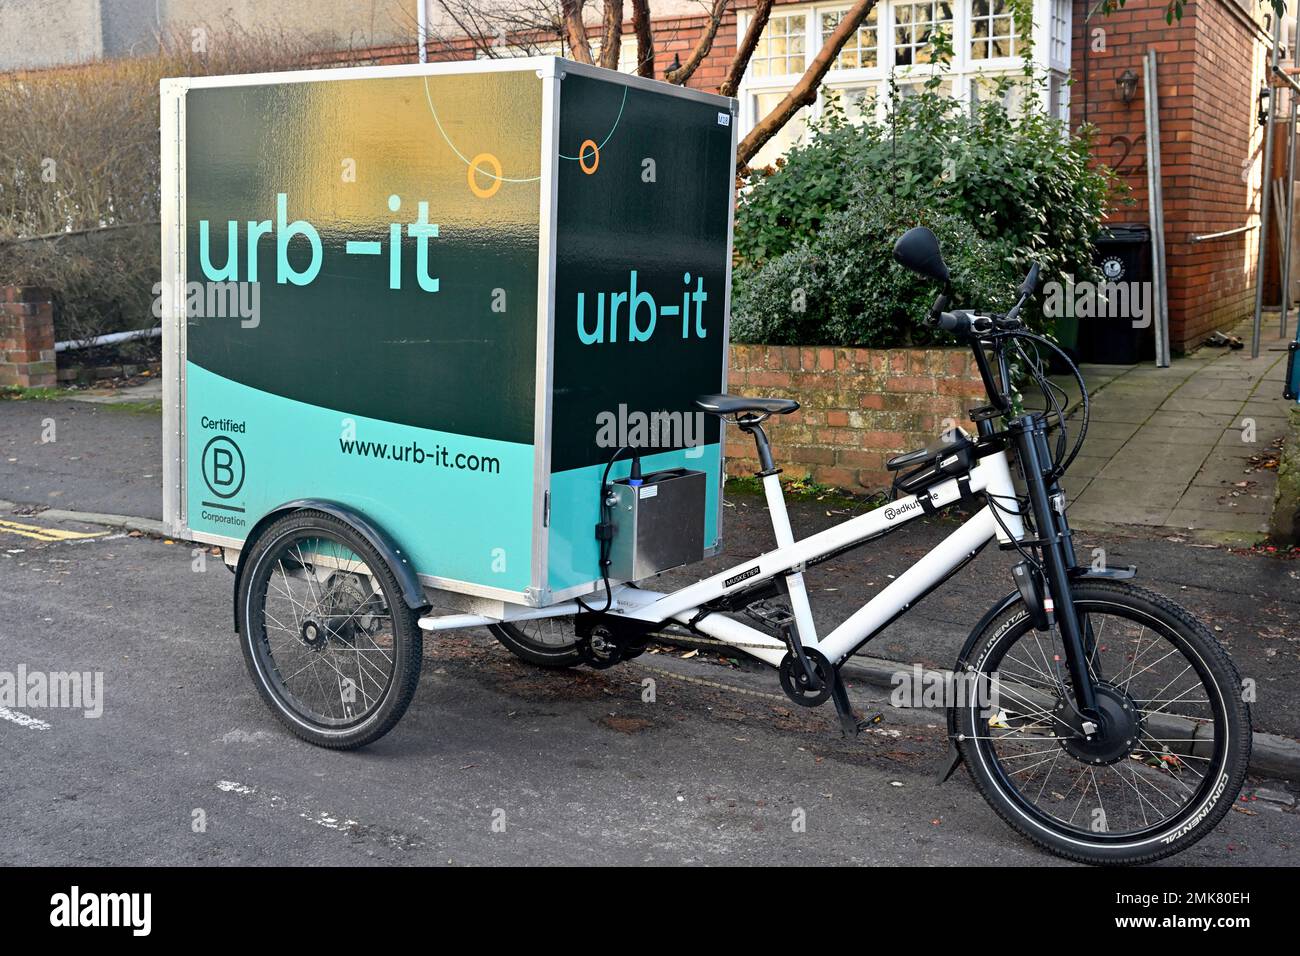 Cargo bike used for delivering parcels by cycle courier urb-it in front of houses, England Stock Photo